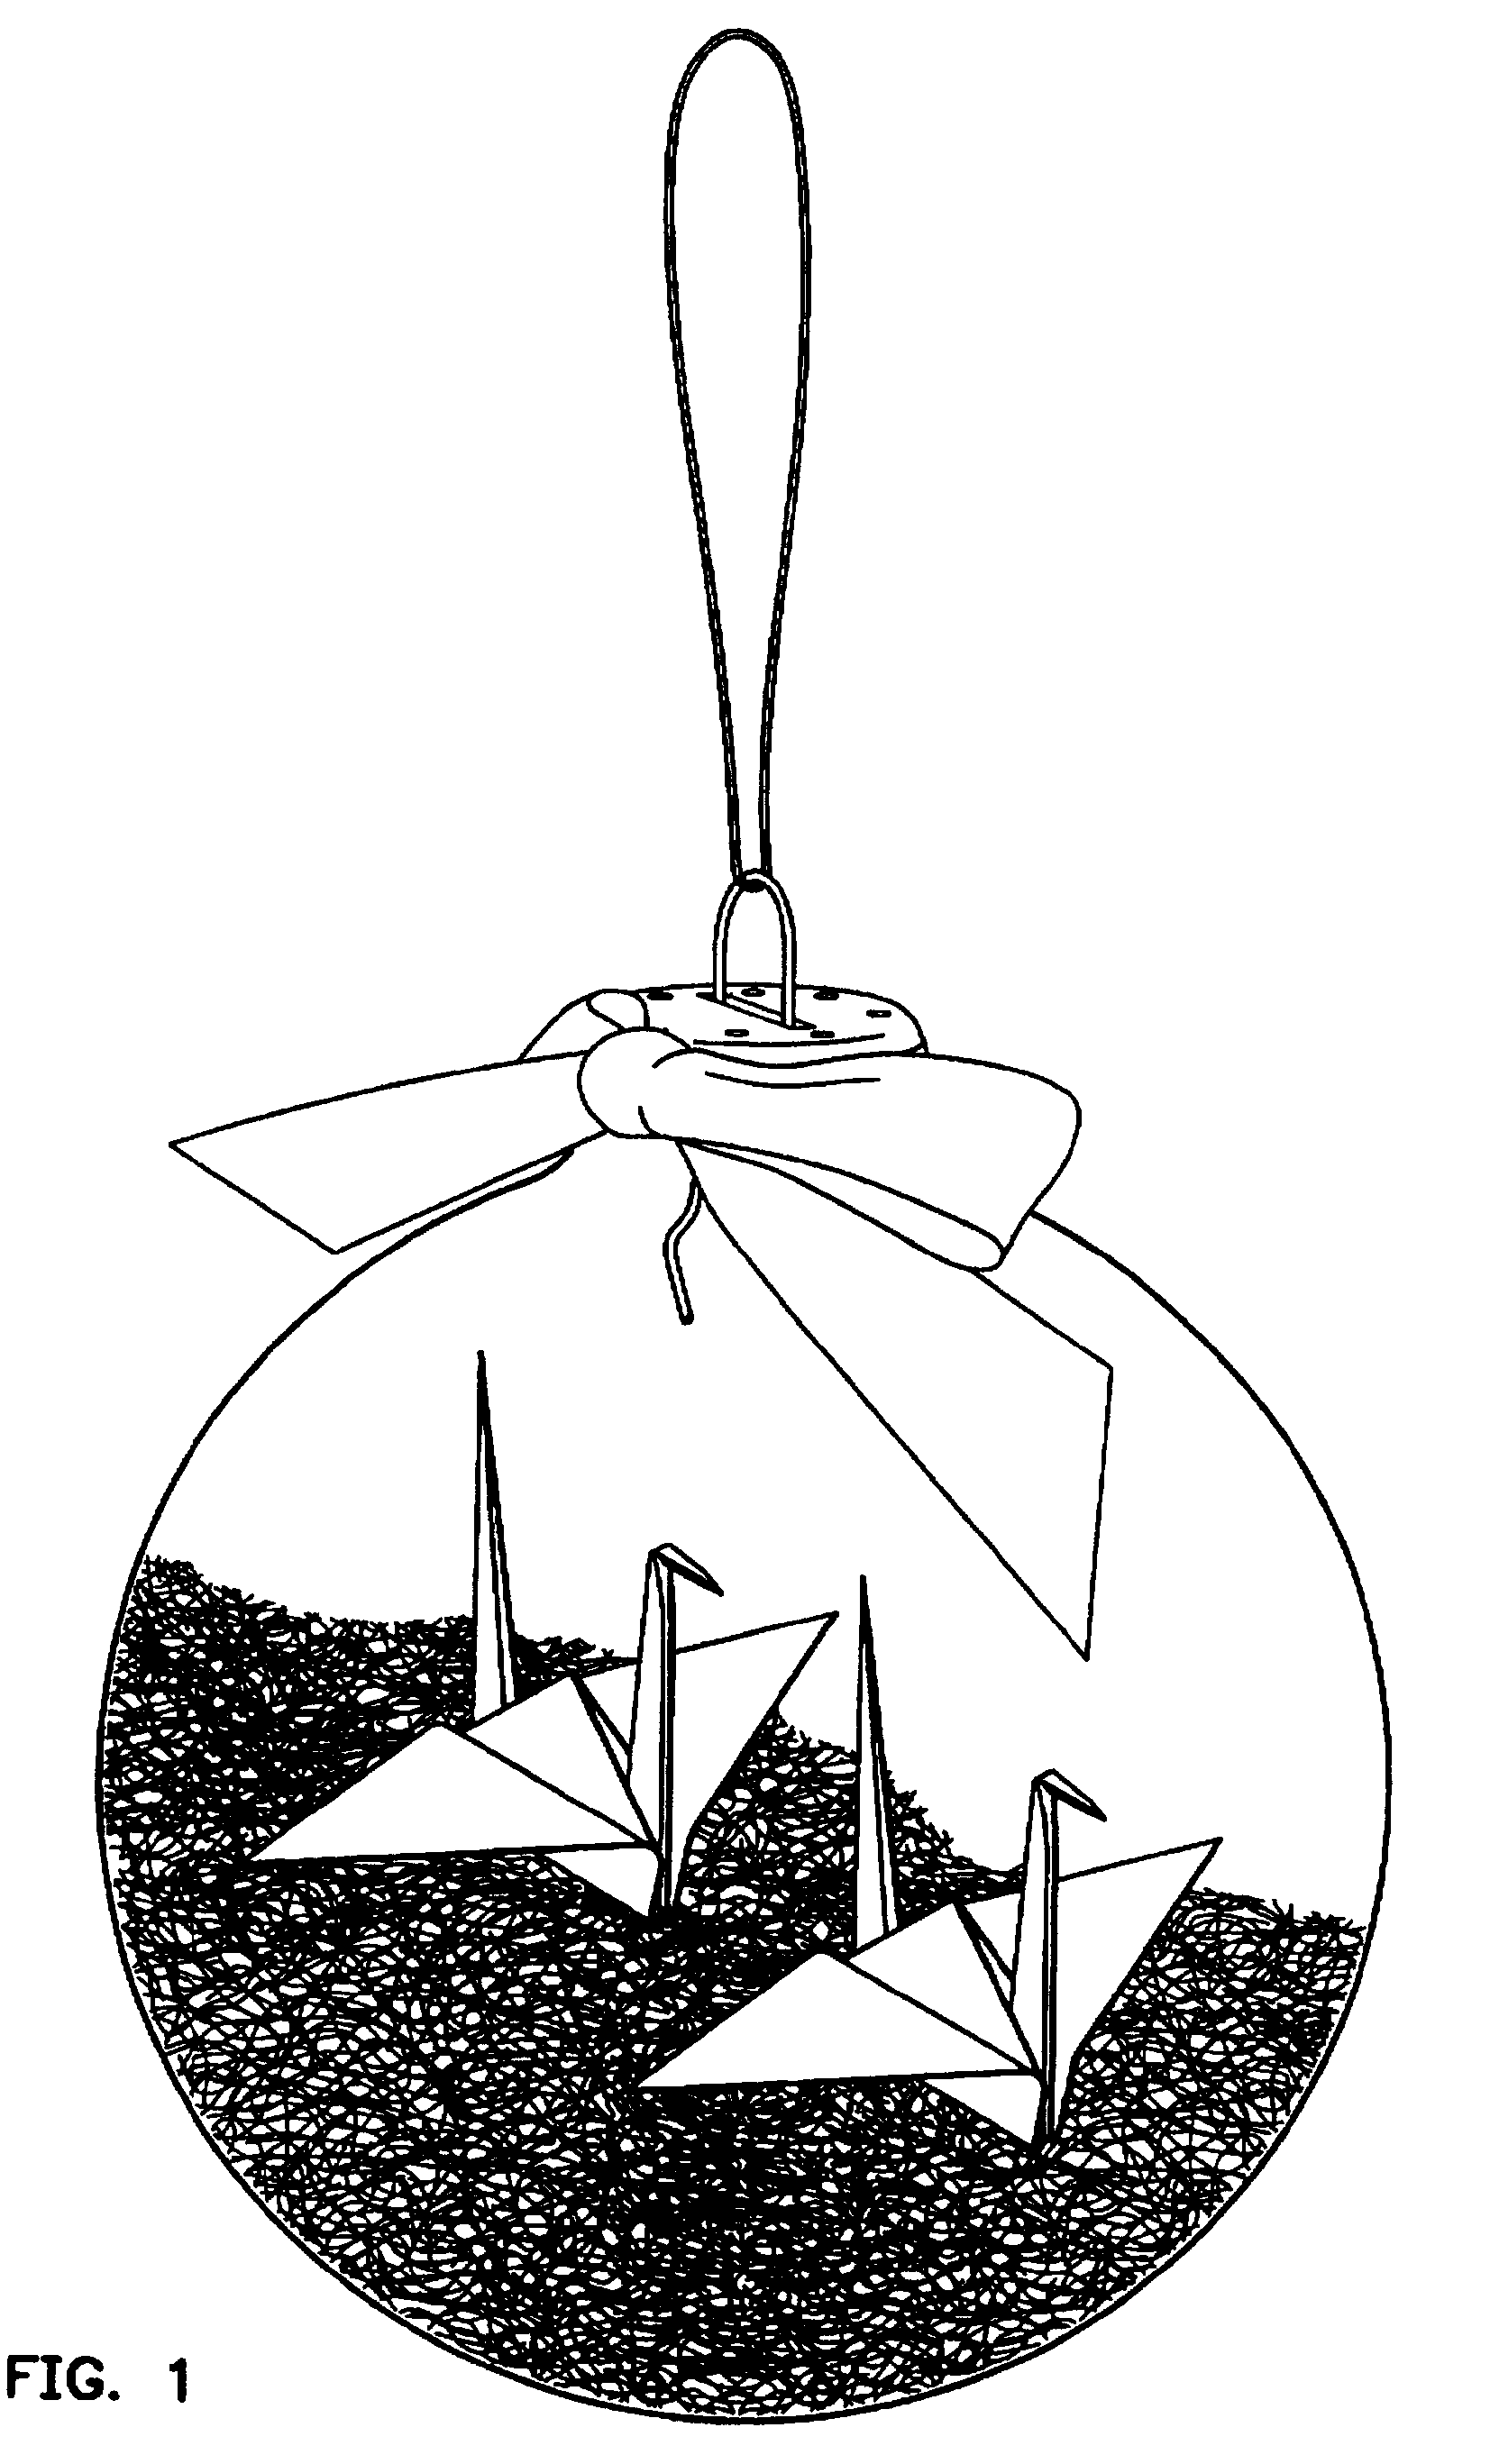 example of an origami object inside an ornament